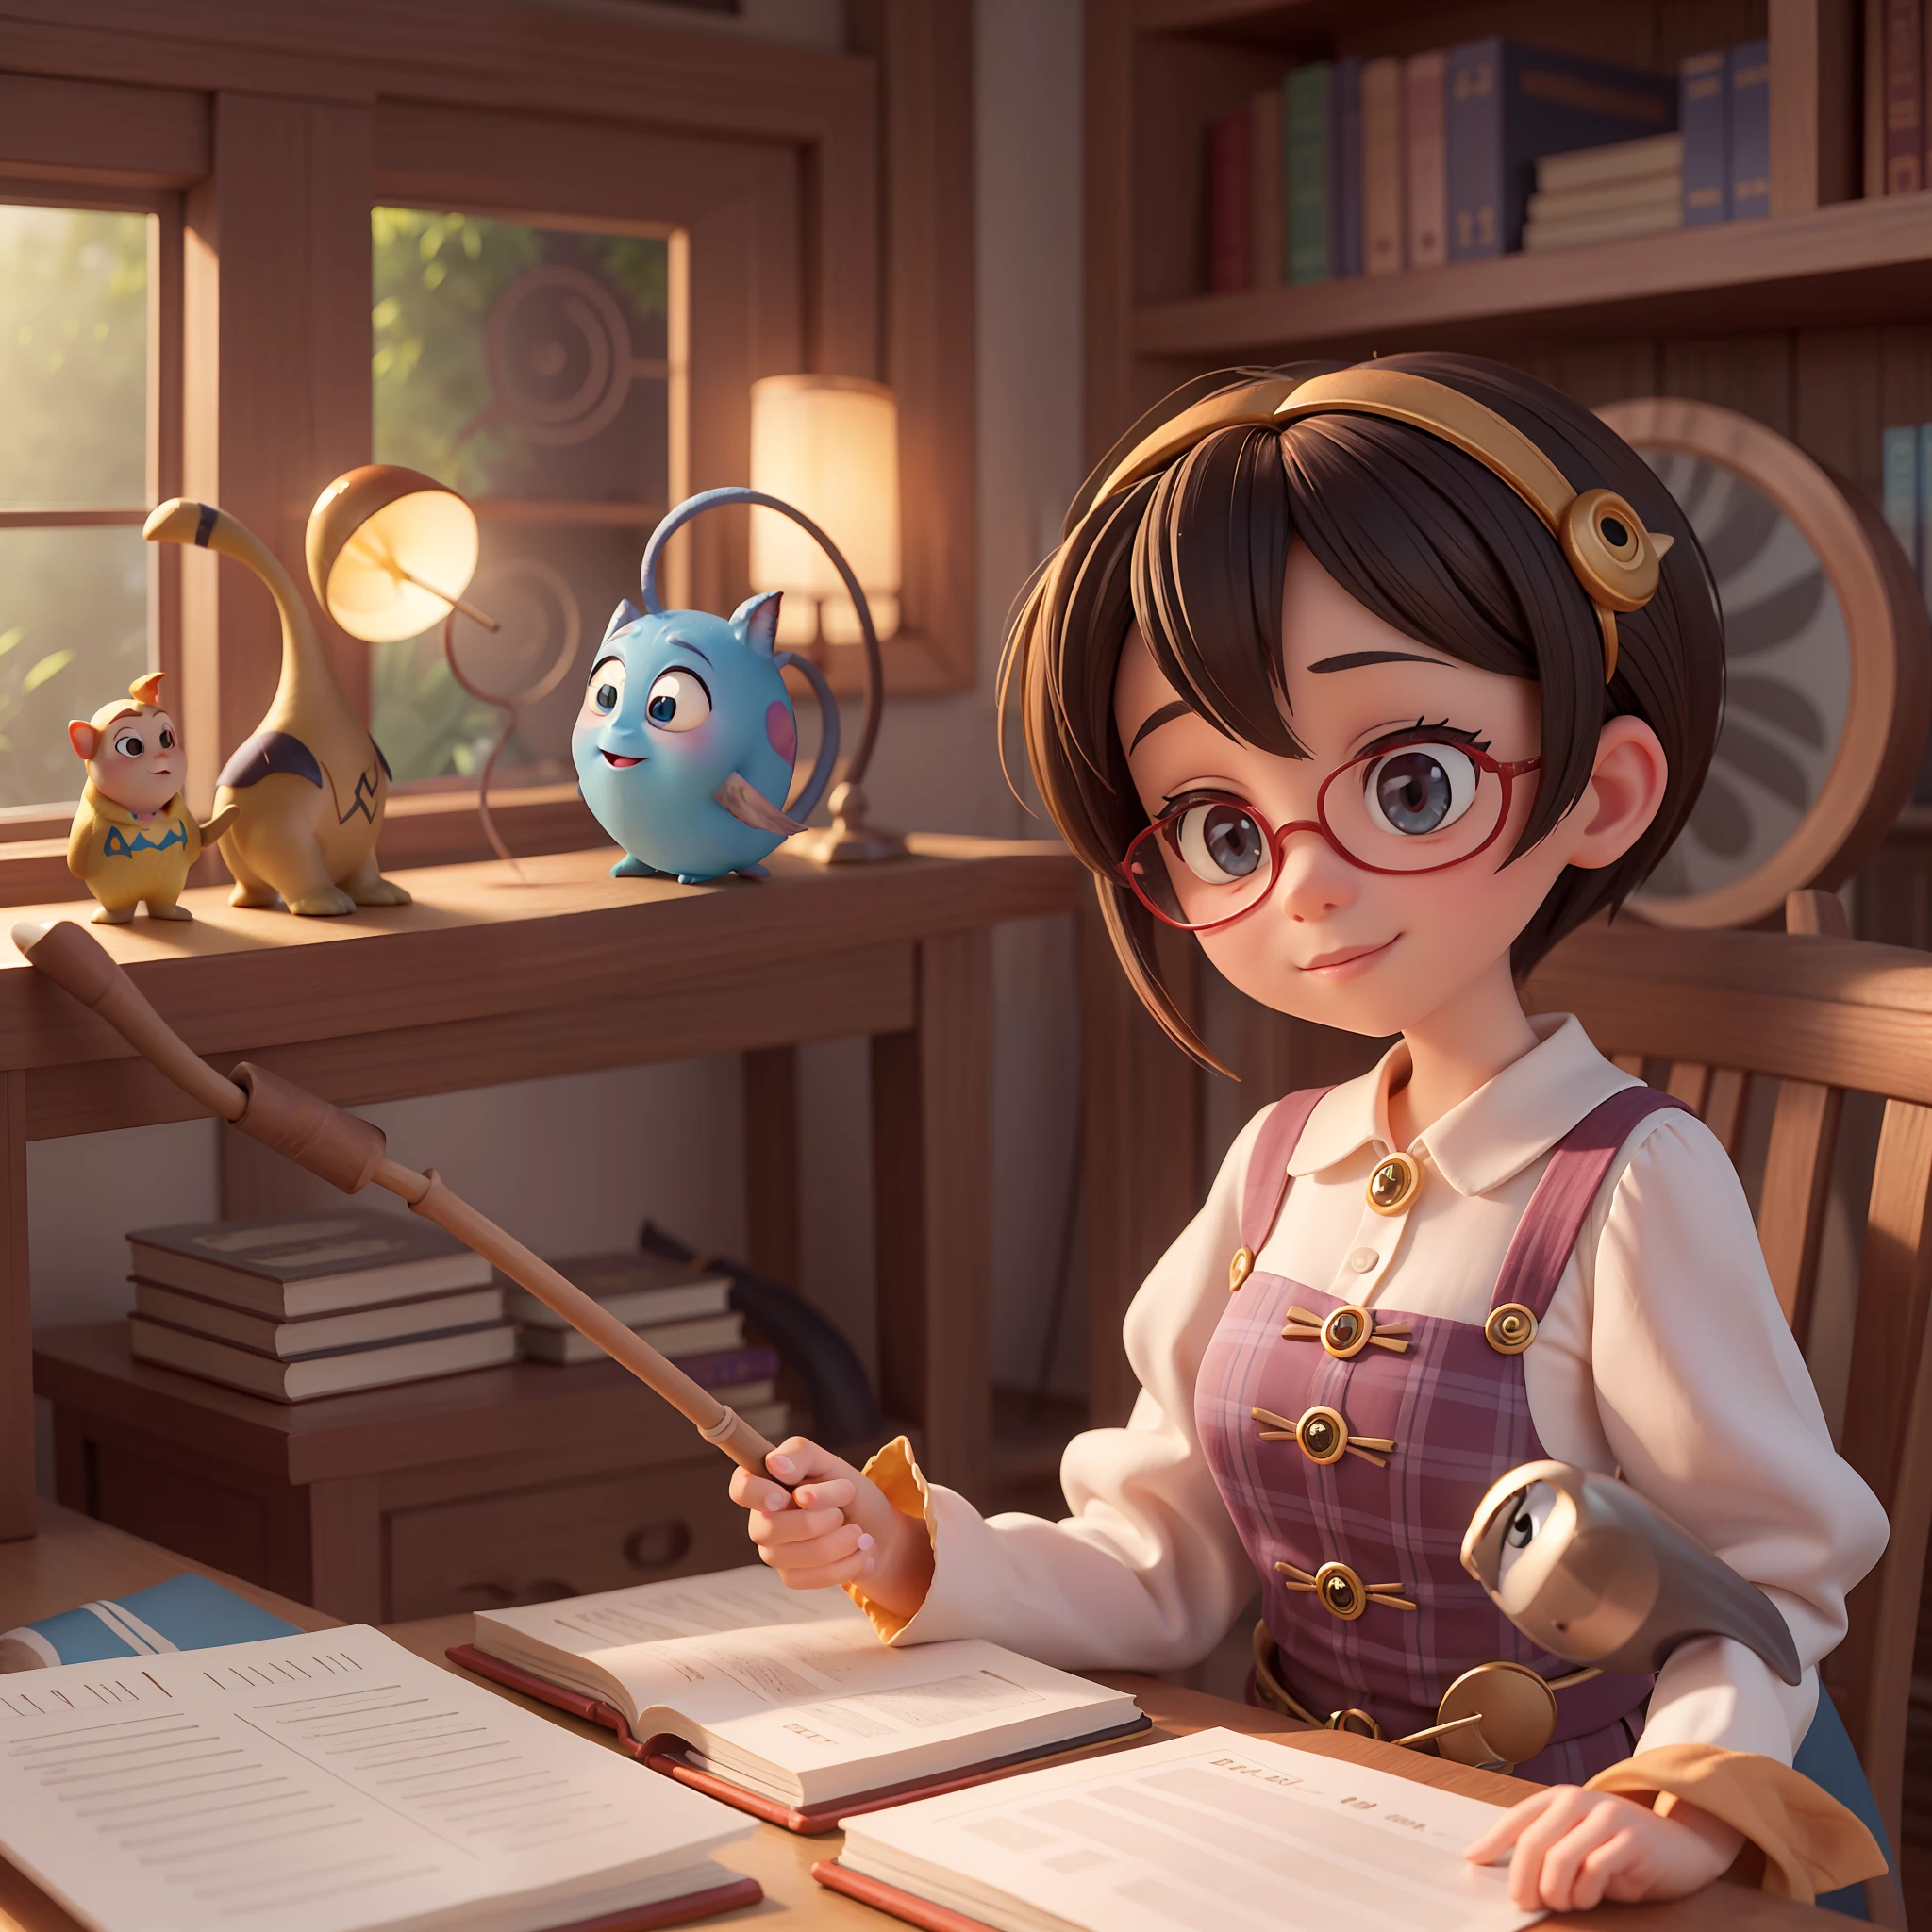 a cute pixar witch in a pixar library, pixar, sun light, warm color background